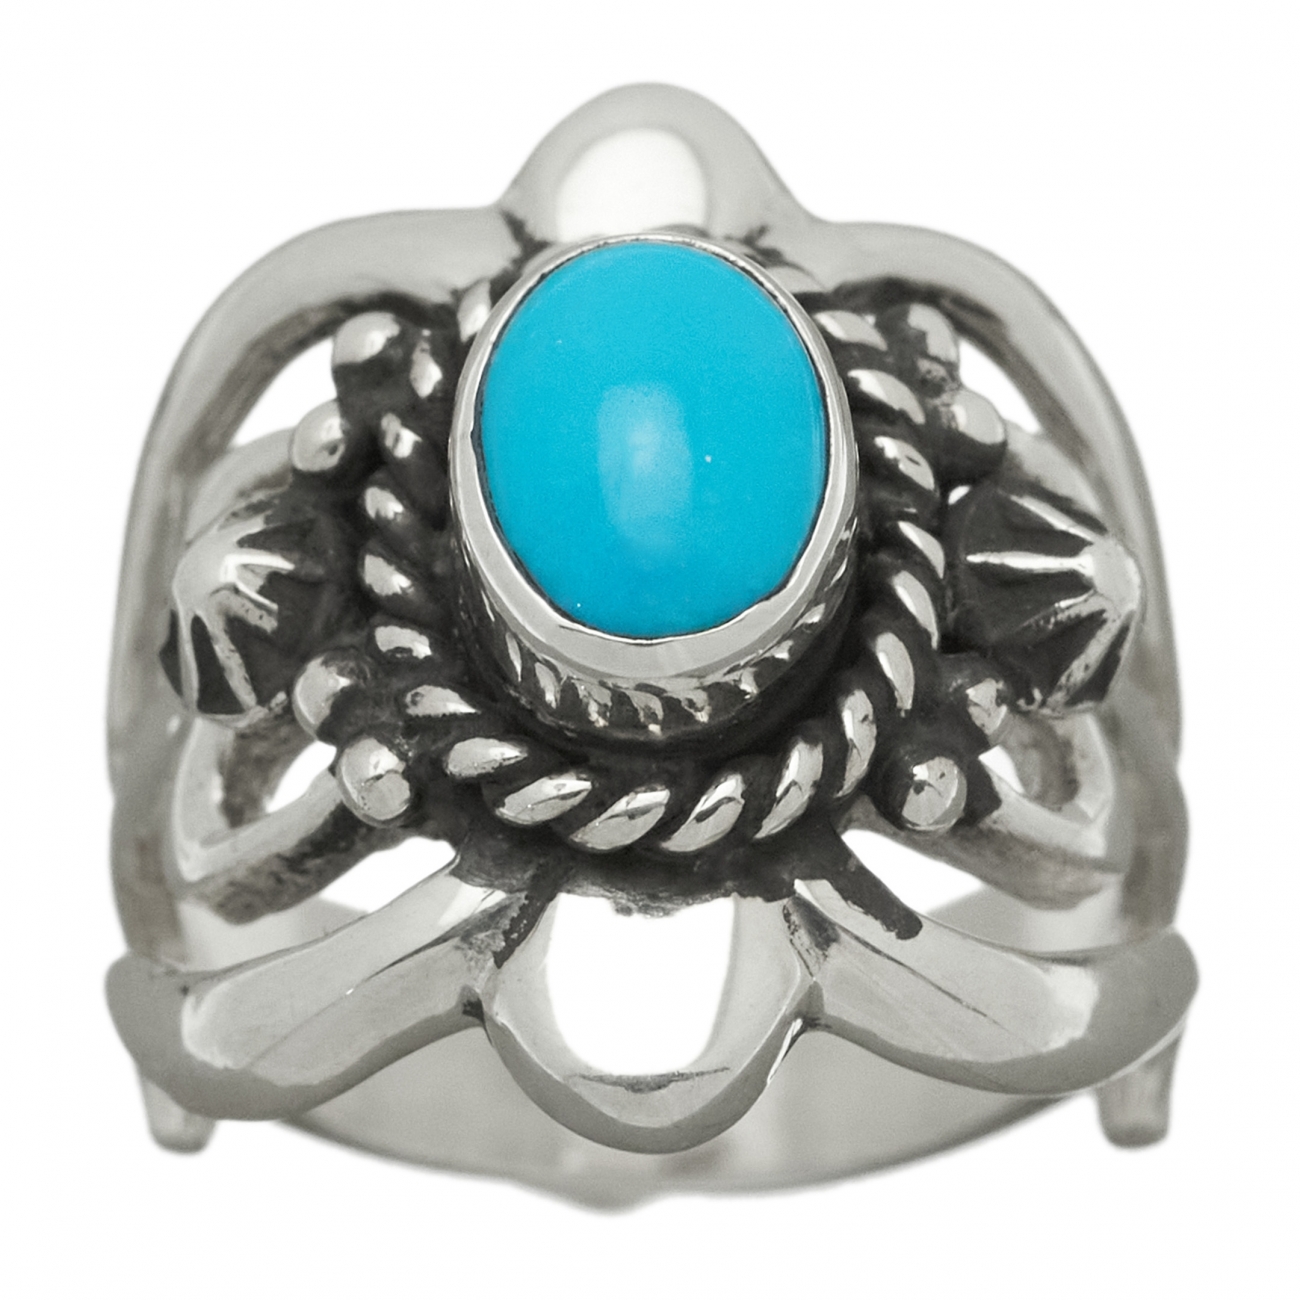 Navajo ring BA967 for women in turquoise and silver - Harpo Paris